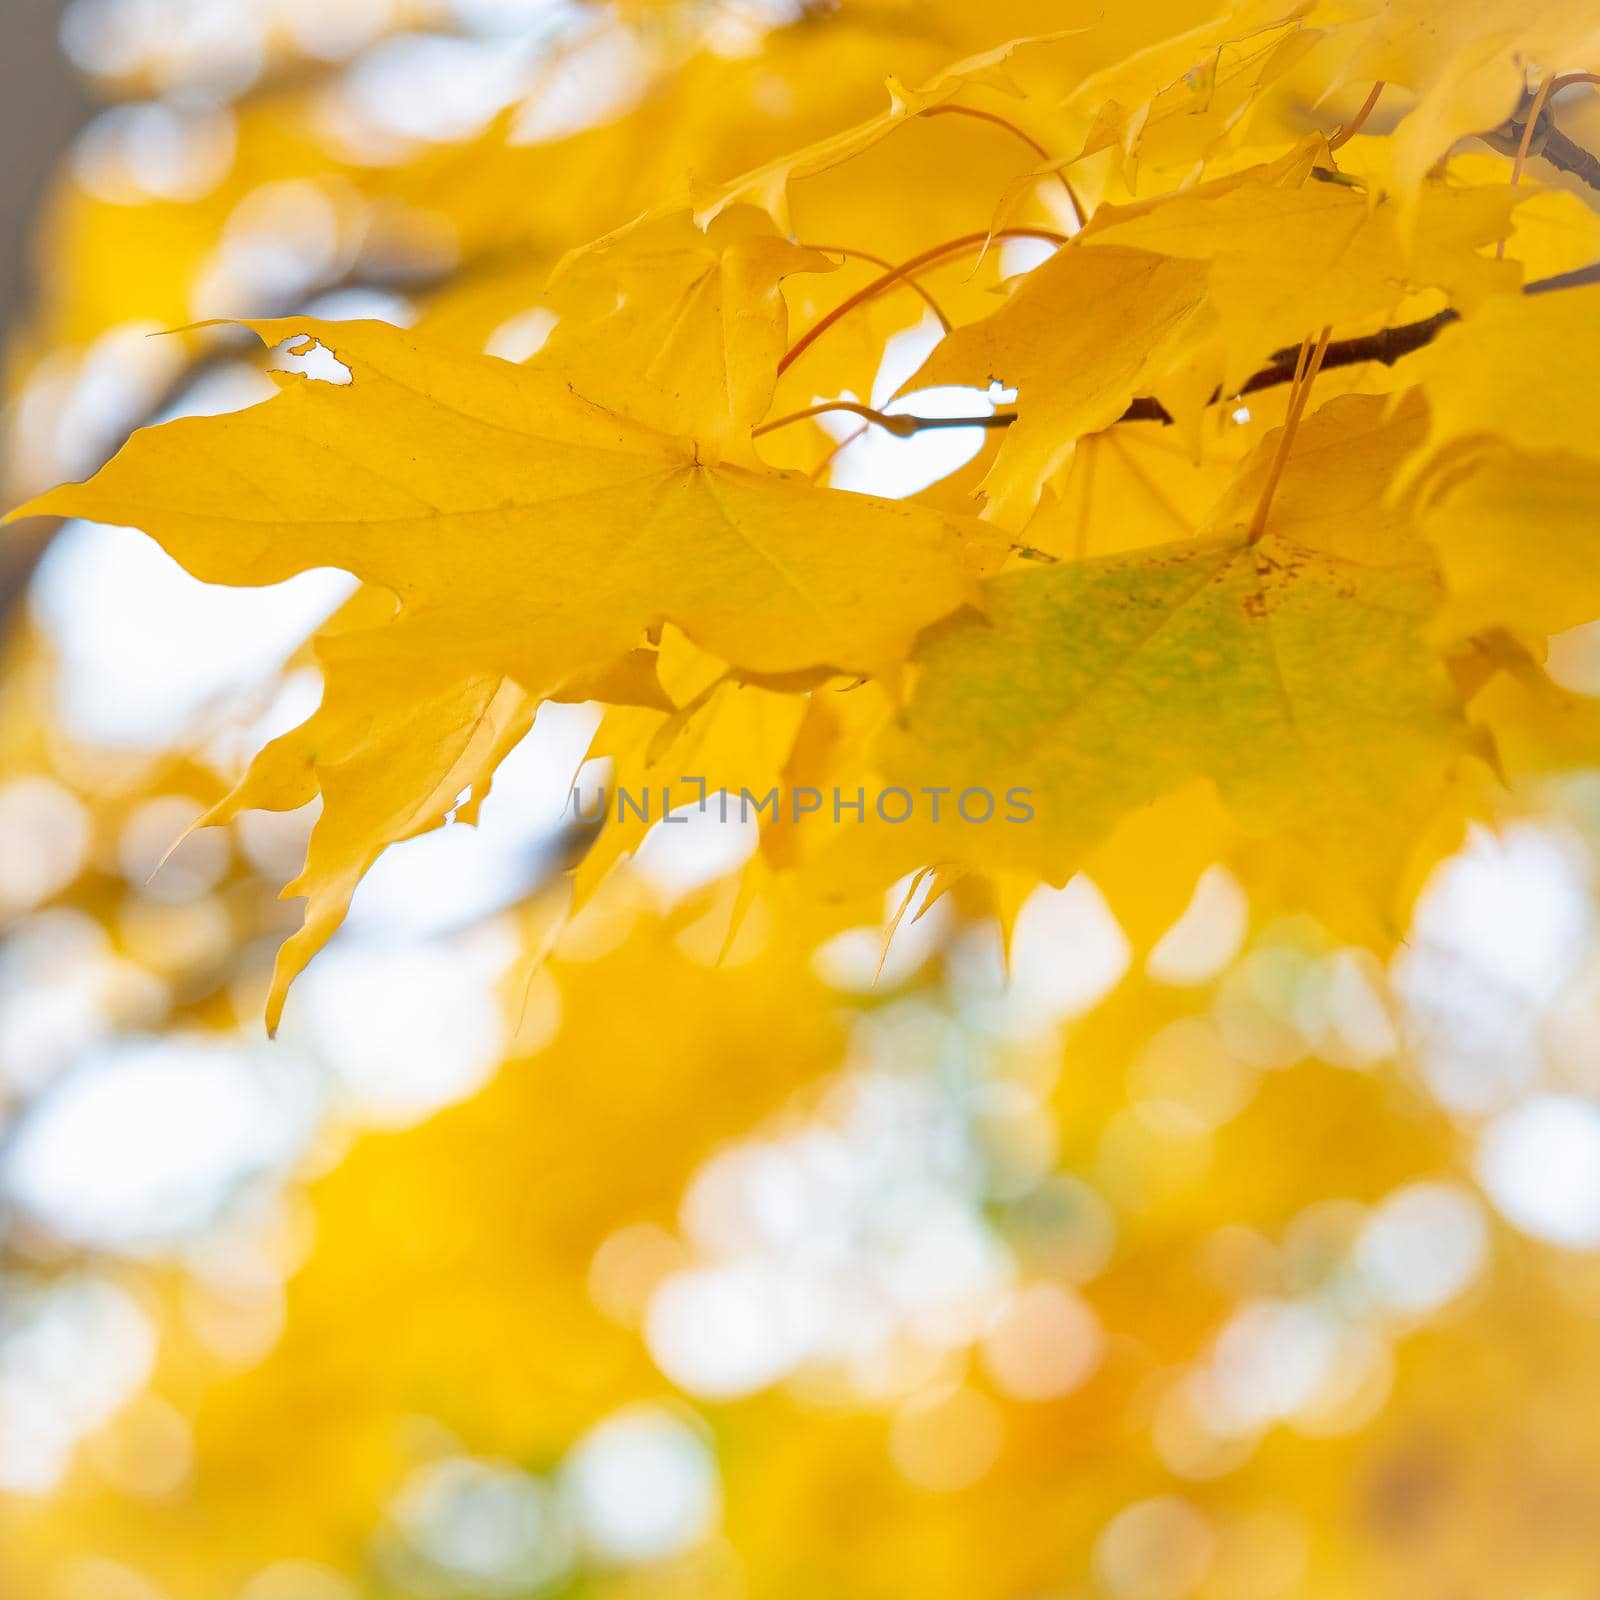 autumn abstract background of bright yellow and green leaves by NataBene